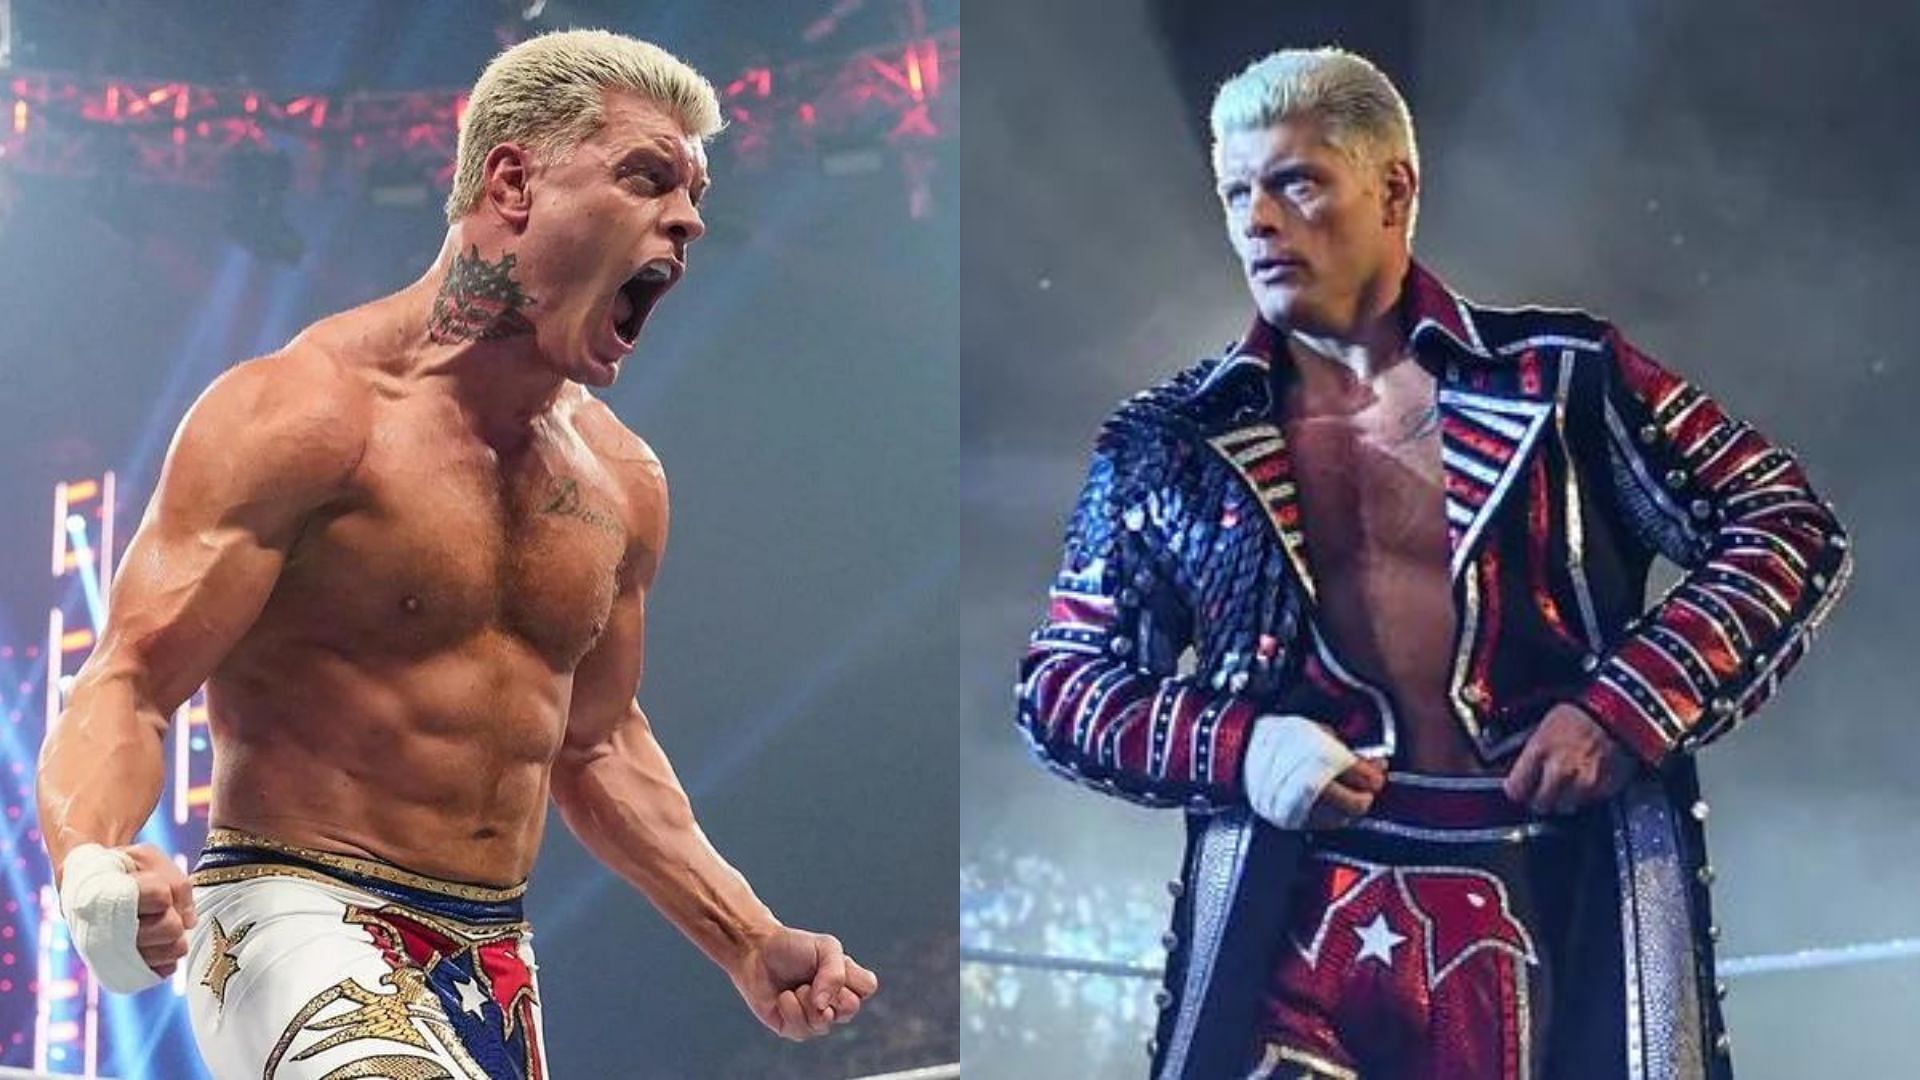 Cody Rhodes is currently feuding with Brock Lesnar